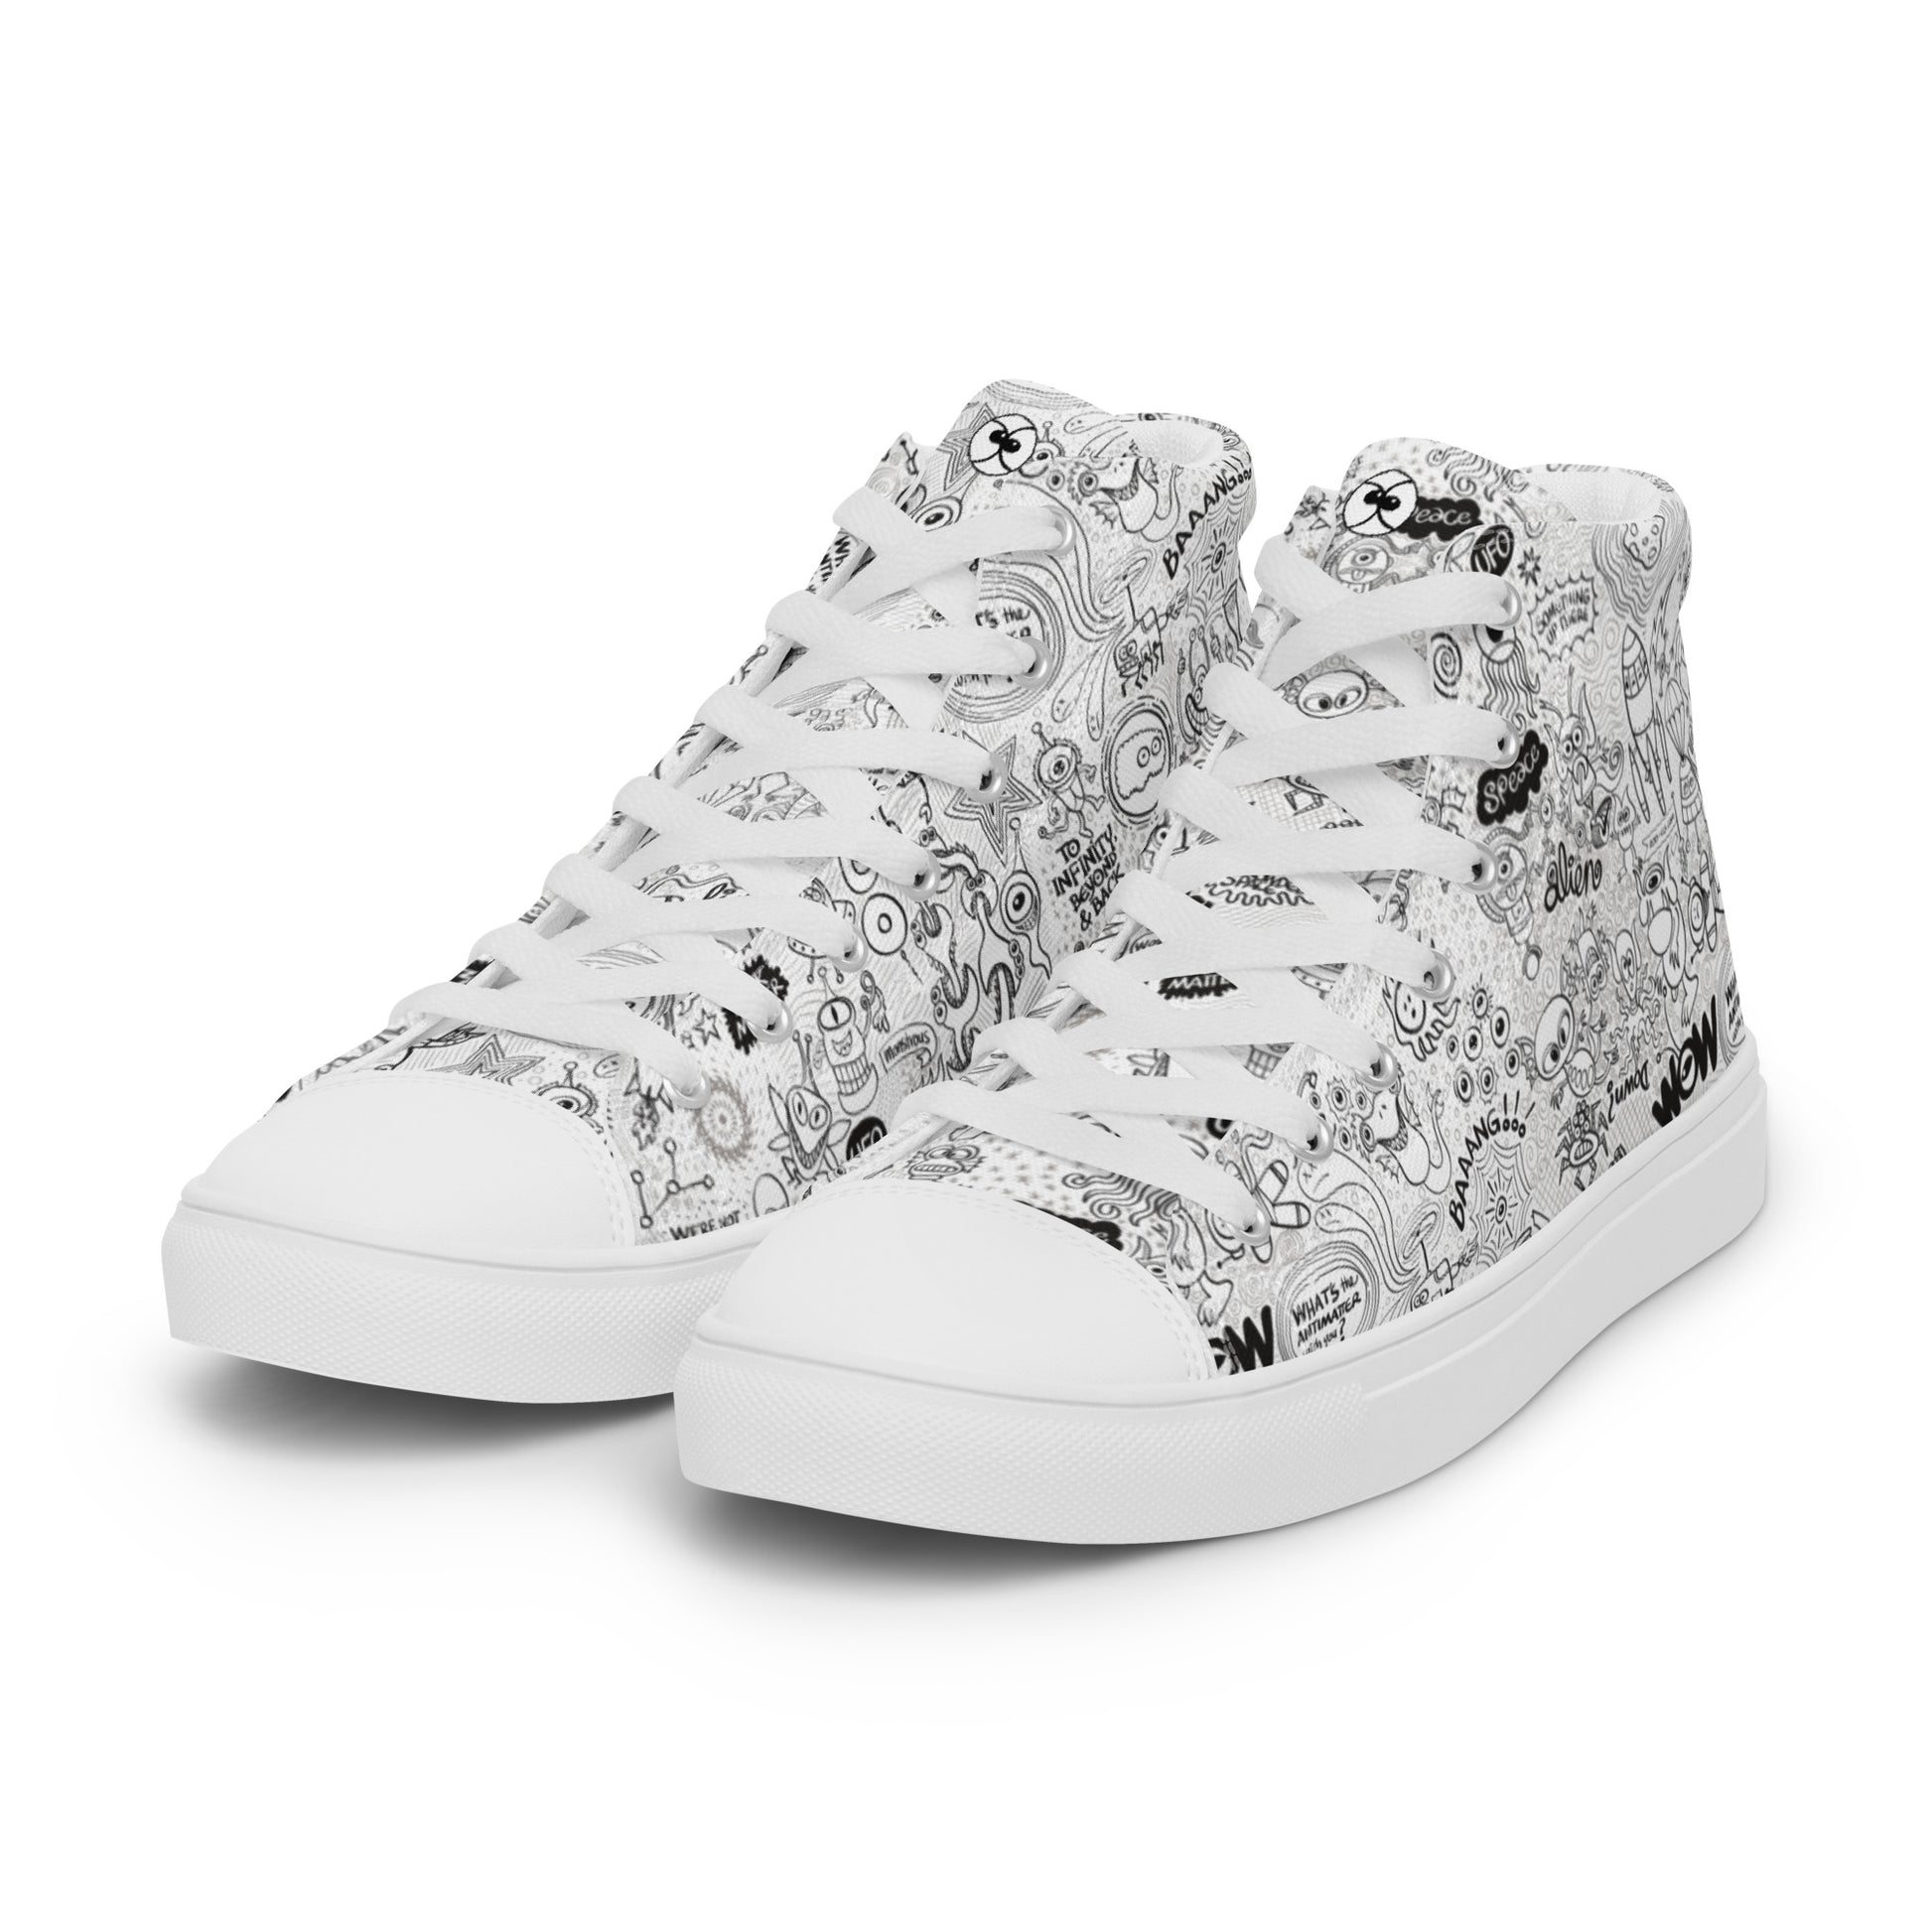 Celebrating the most comprehensive Doodle art of the universe Men’s high top canvas shoes. Overview